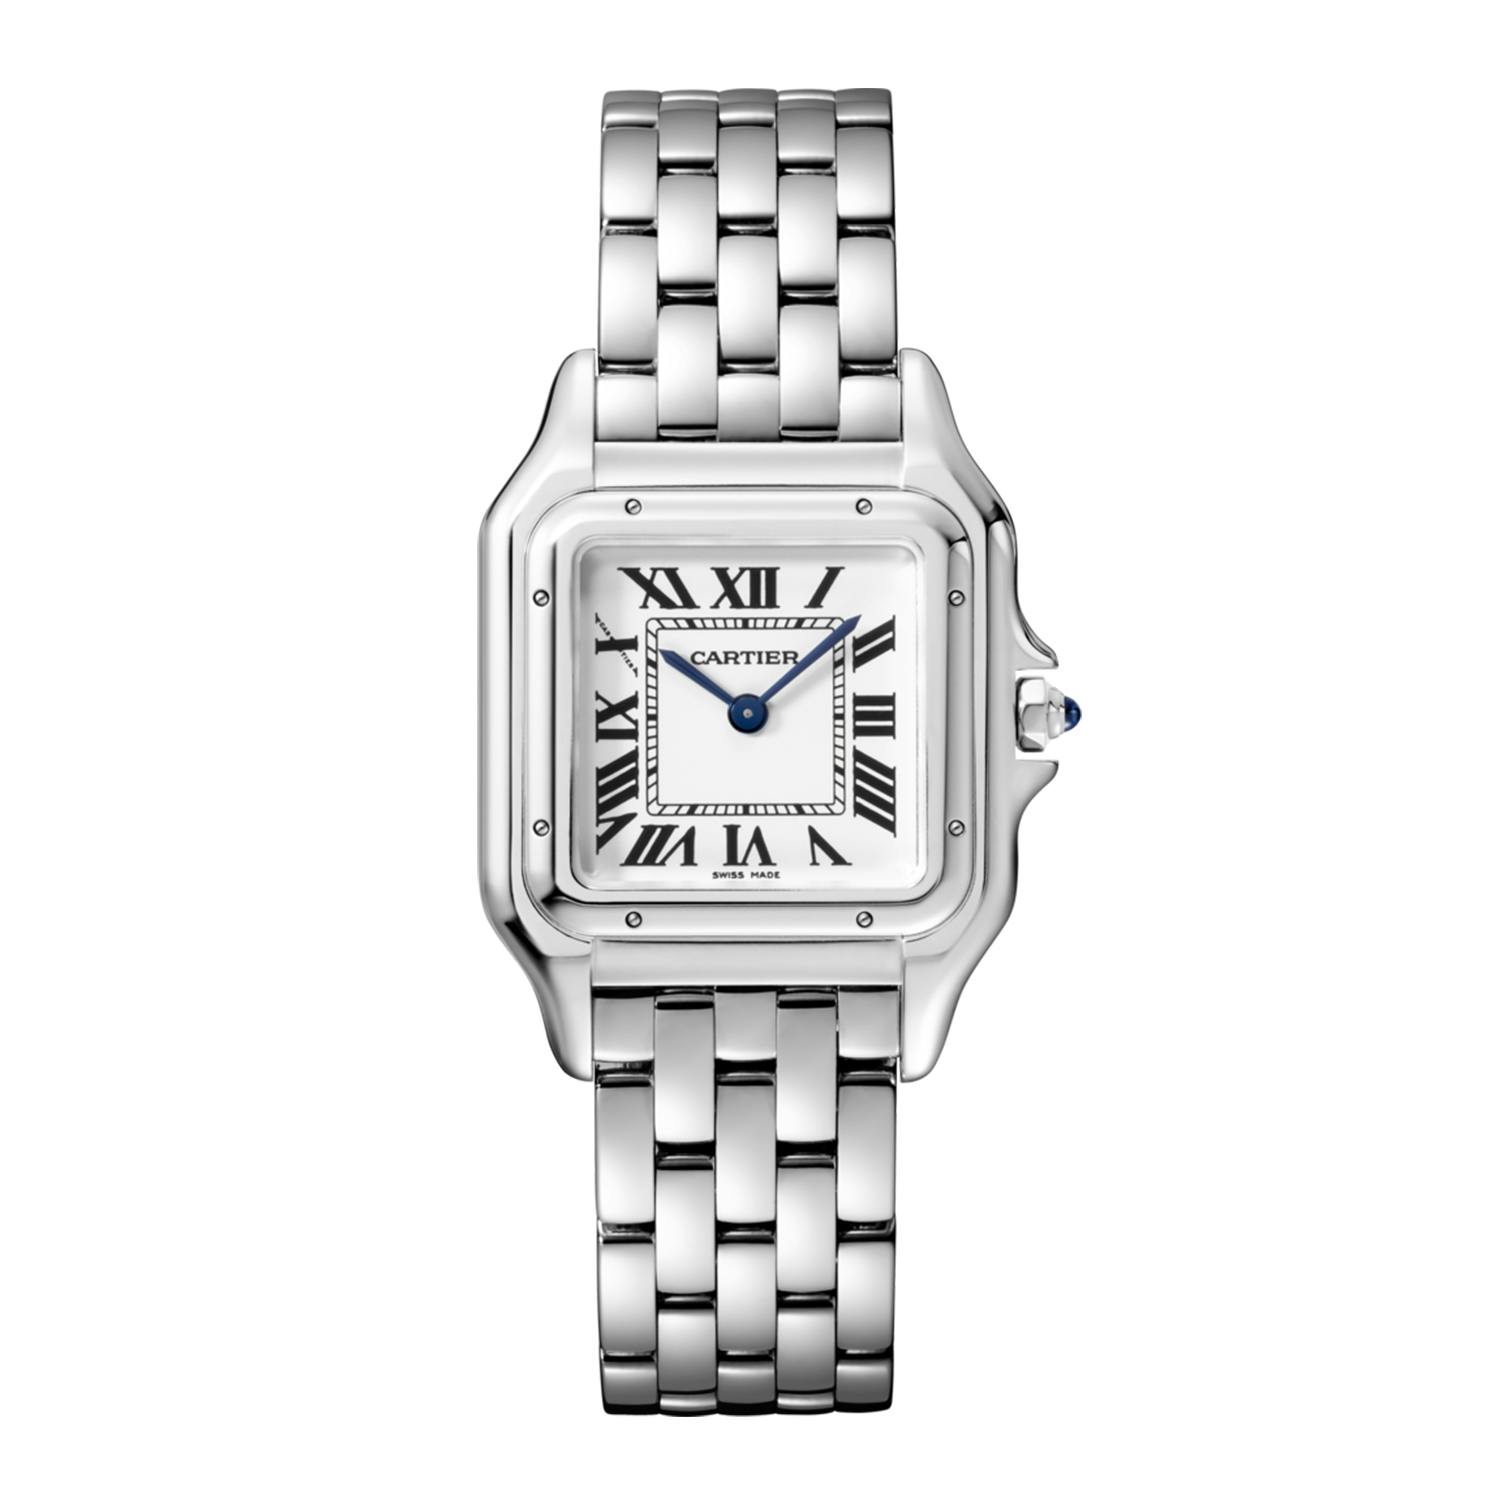 Panthere De Cartier Watch with Stainless Steel Case